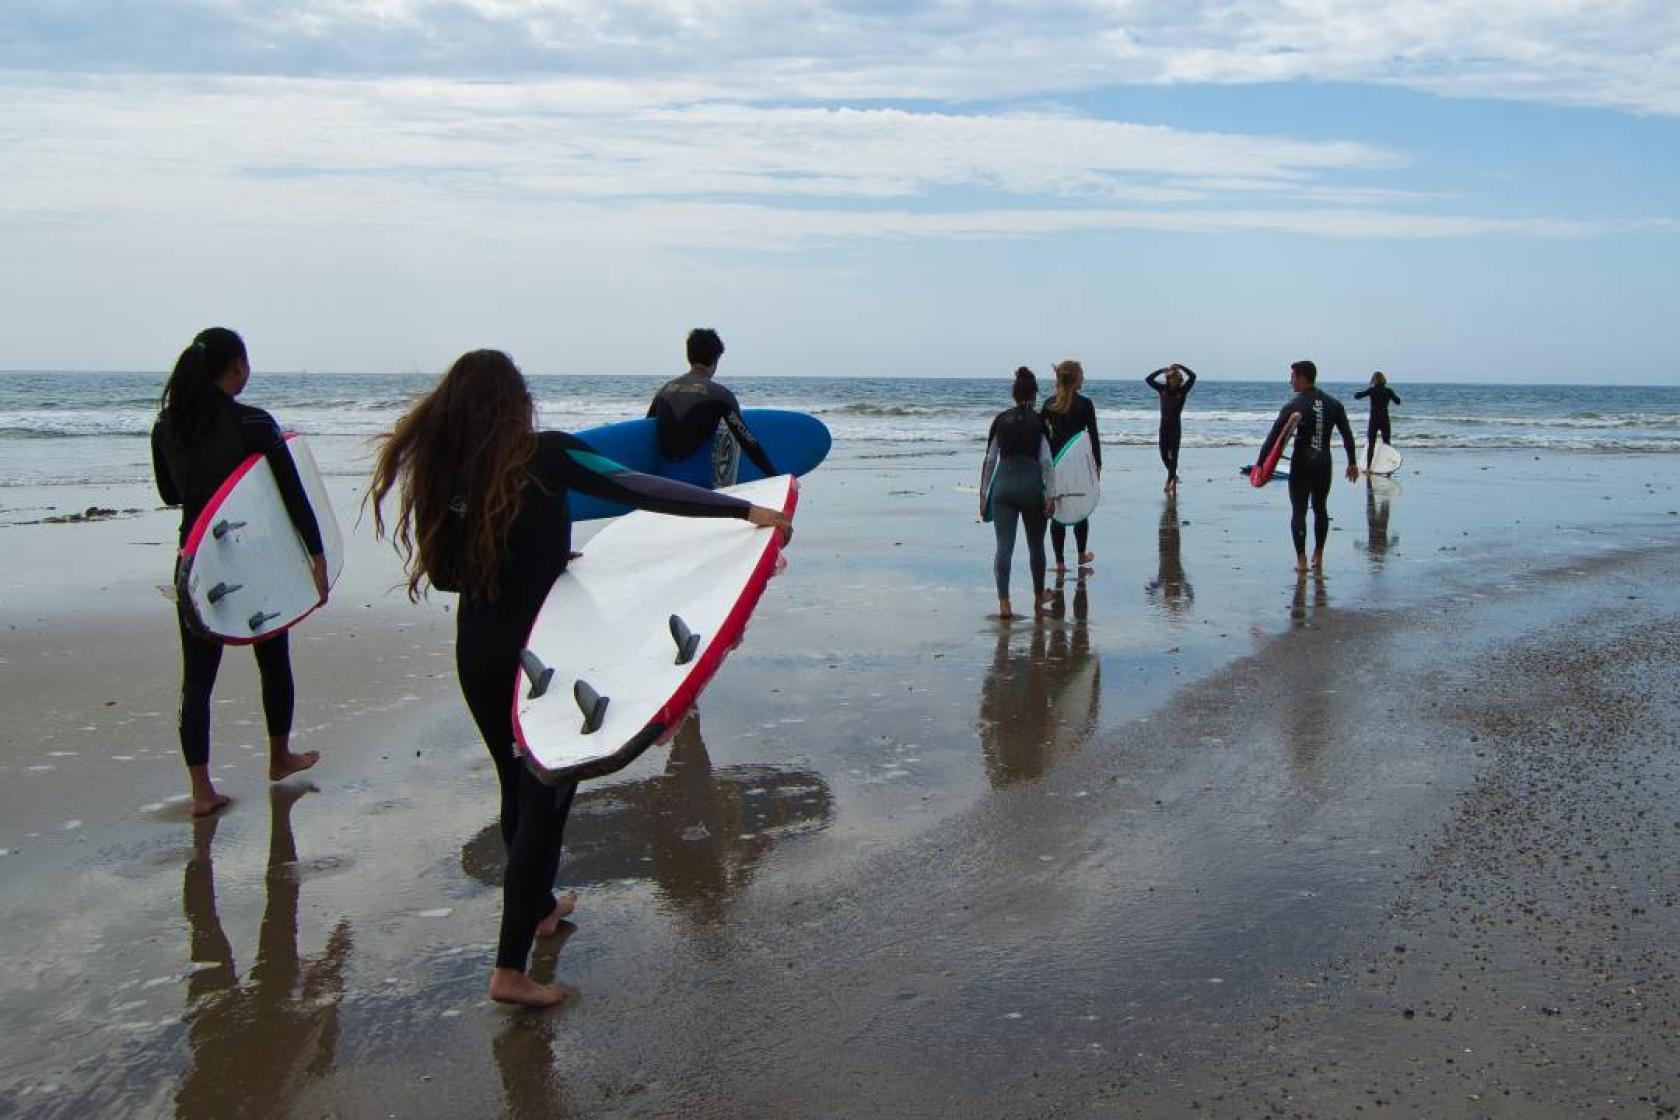 Group of surfers walking on the beach.